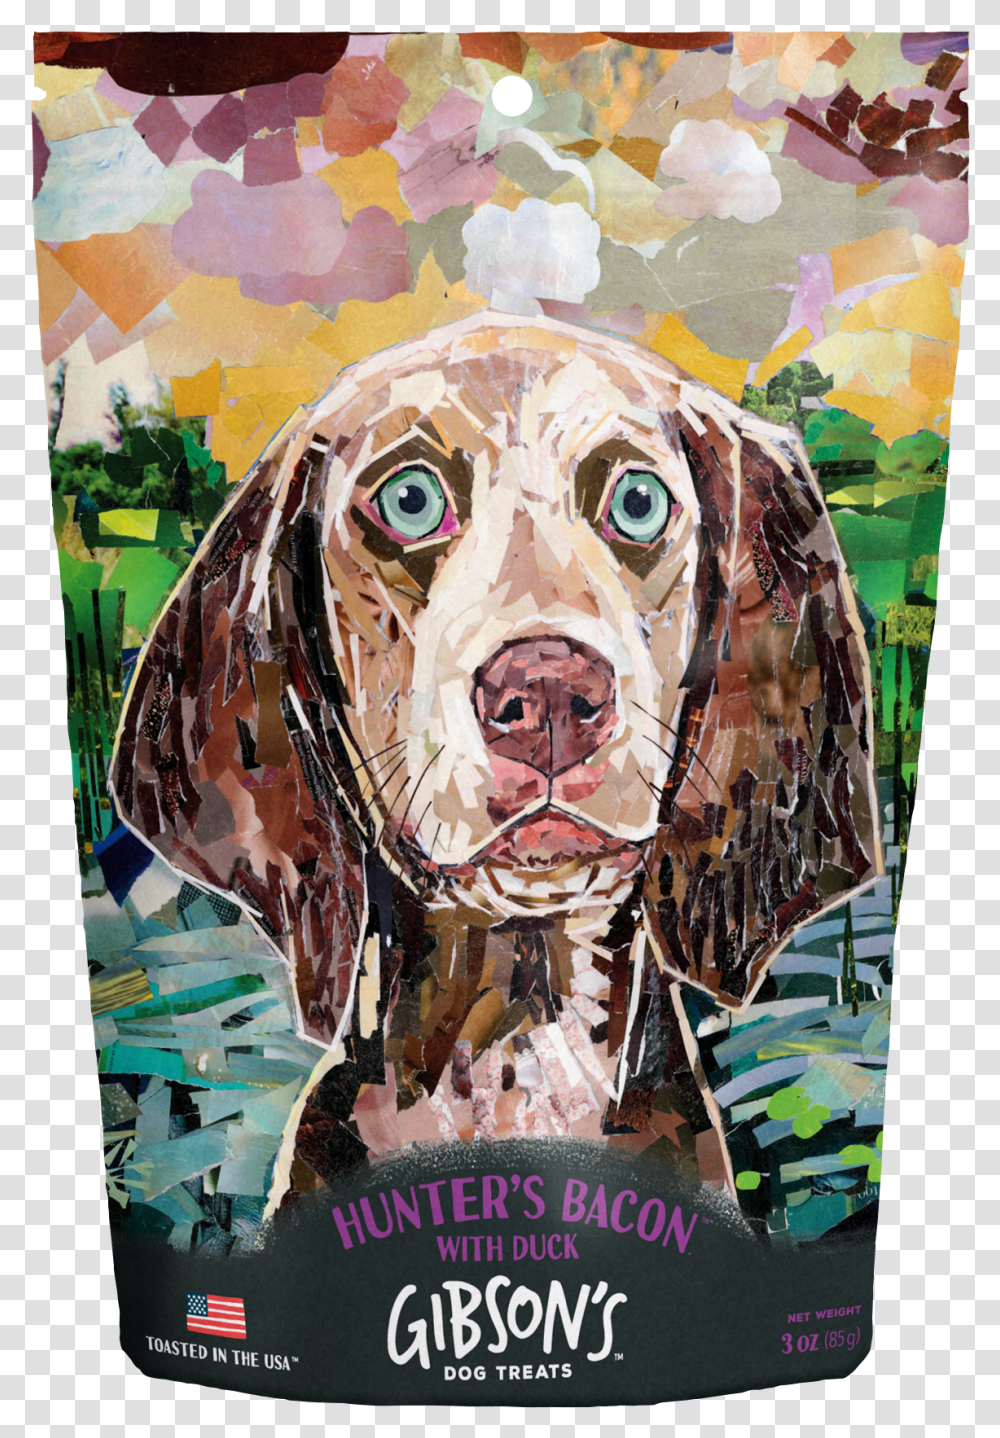 Gibson S Hunter's Bacon With Duck Dog Treats, Collage, Poster, Advertisement Transparent Png